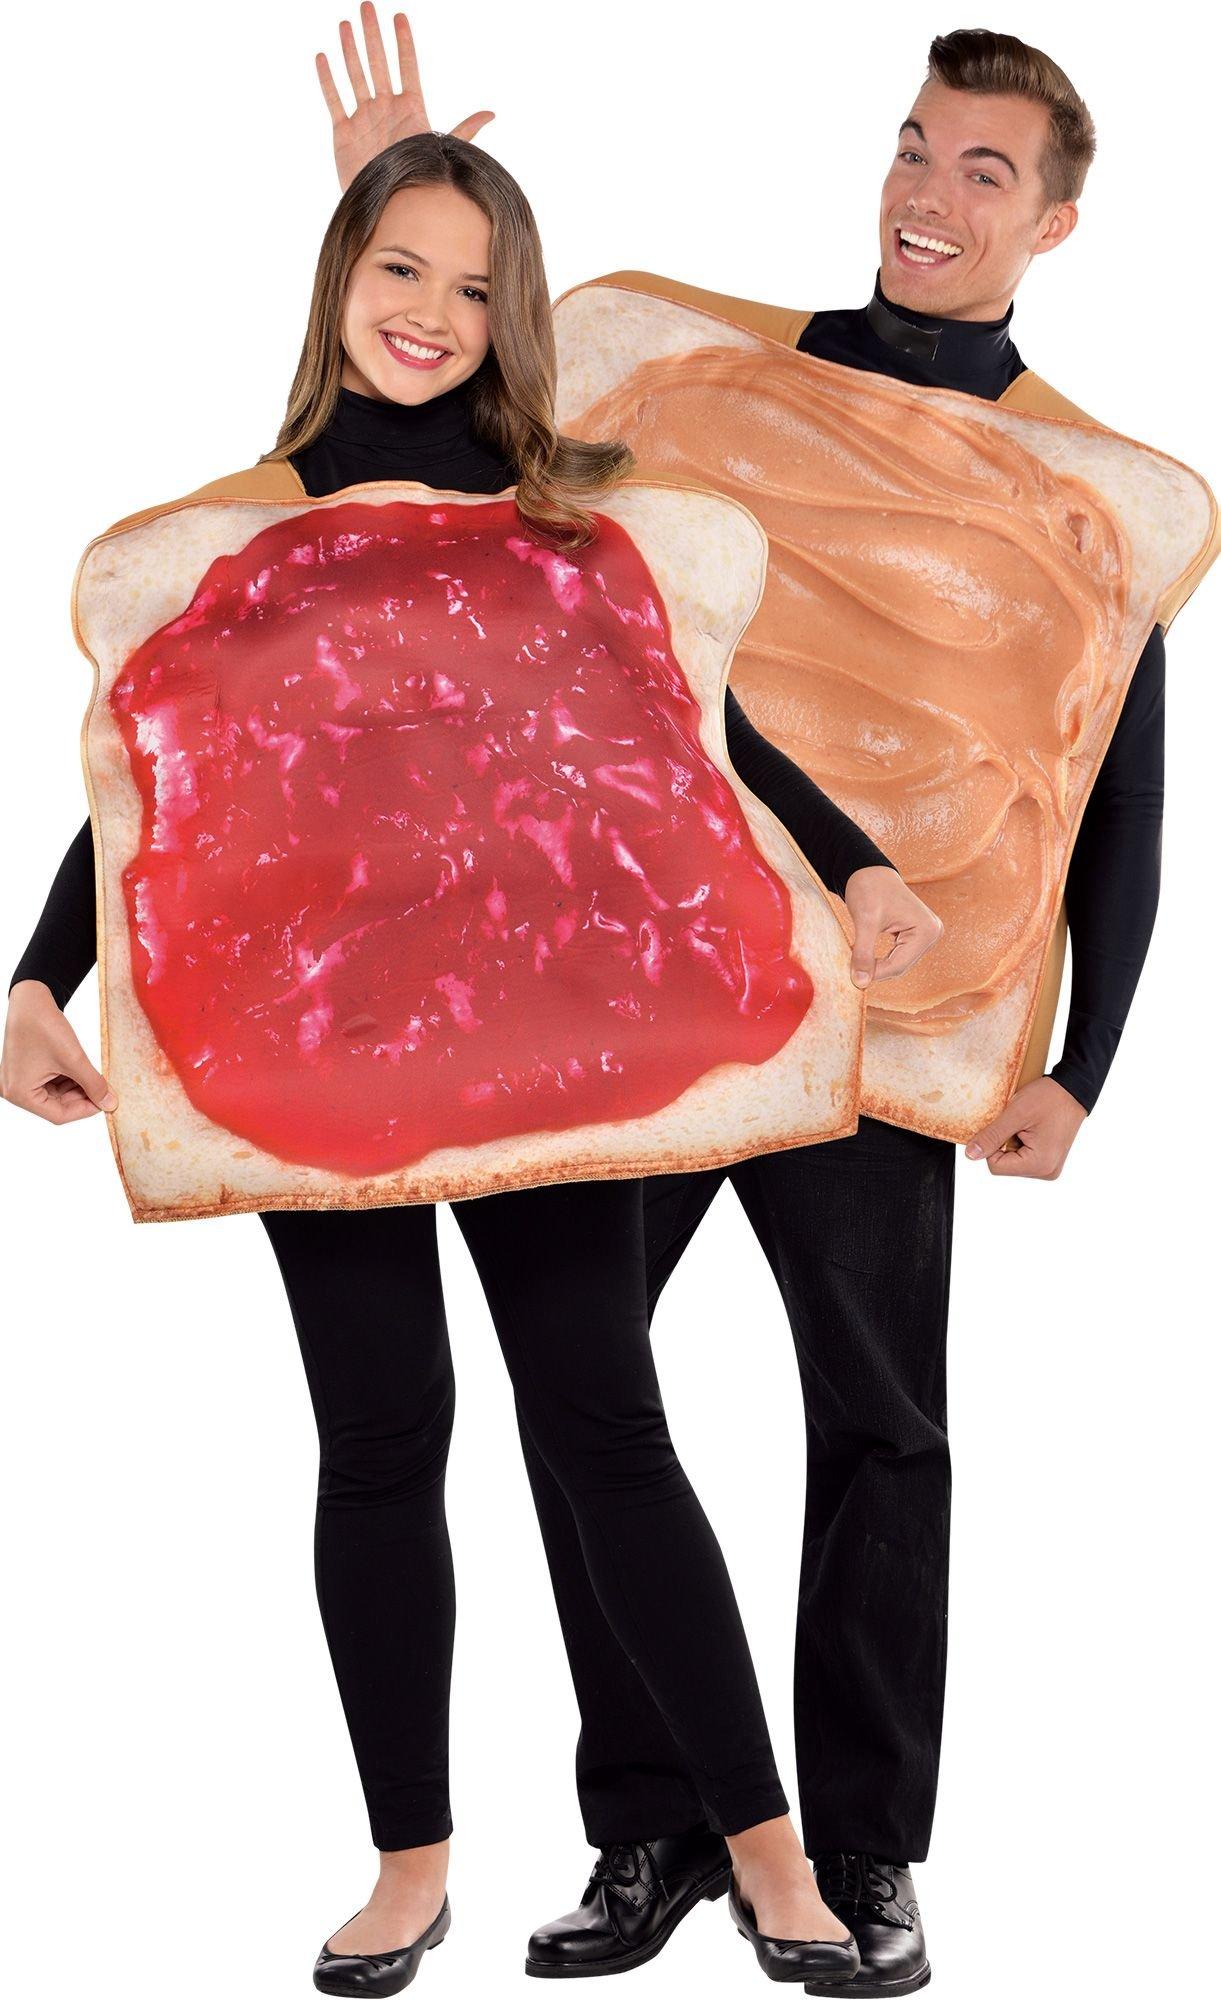 Peanut butter and jelly costume